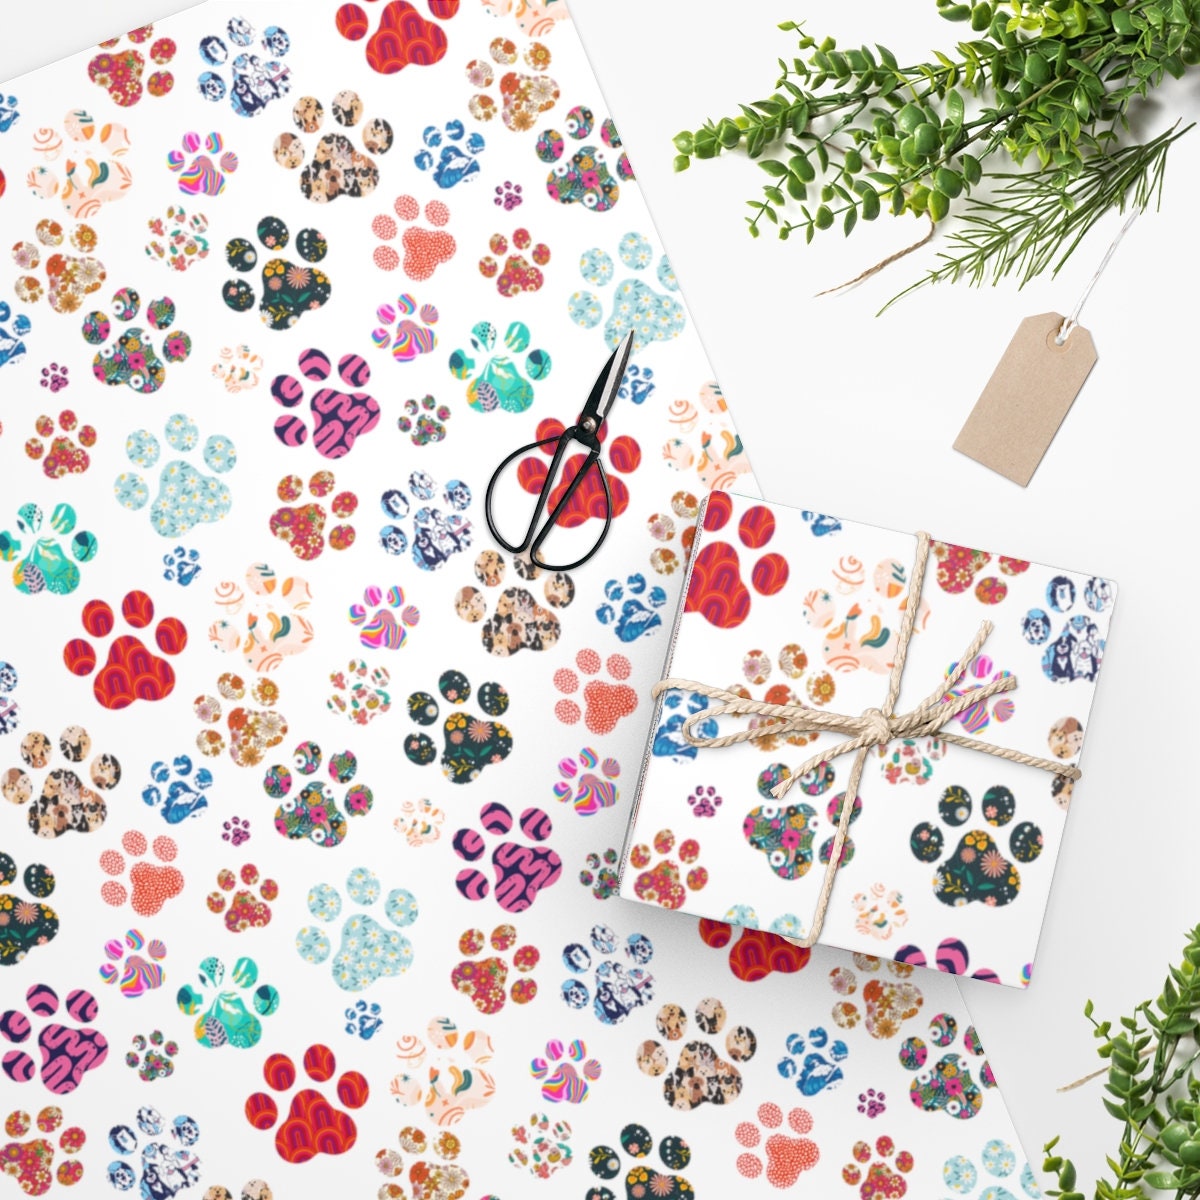 Paw Print Gift Wrapping Paper Roll, Watercolor Paw Prints, Bones, Hearts in  Muted Blue Brown Red Hues, Paw-some All Occasion Furry Friend 